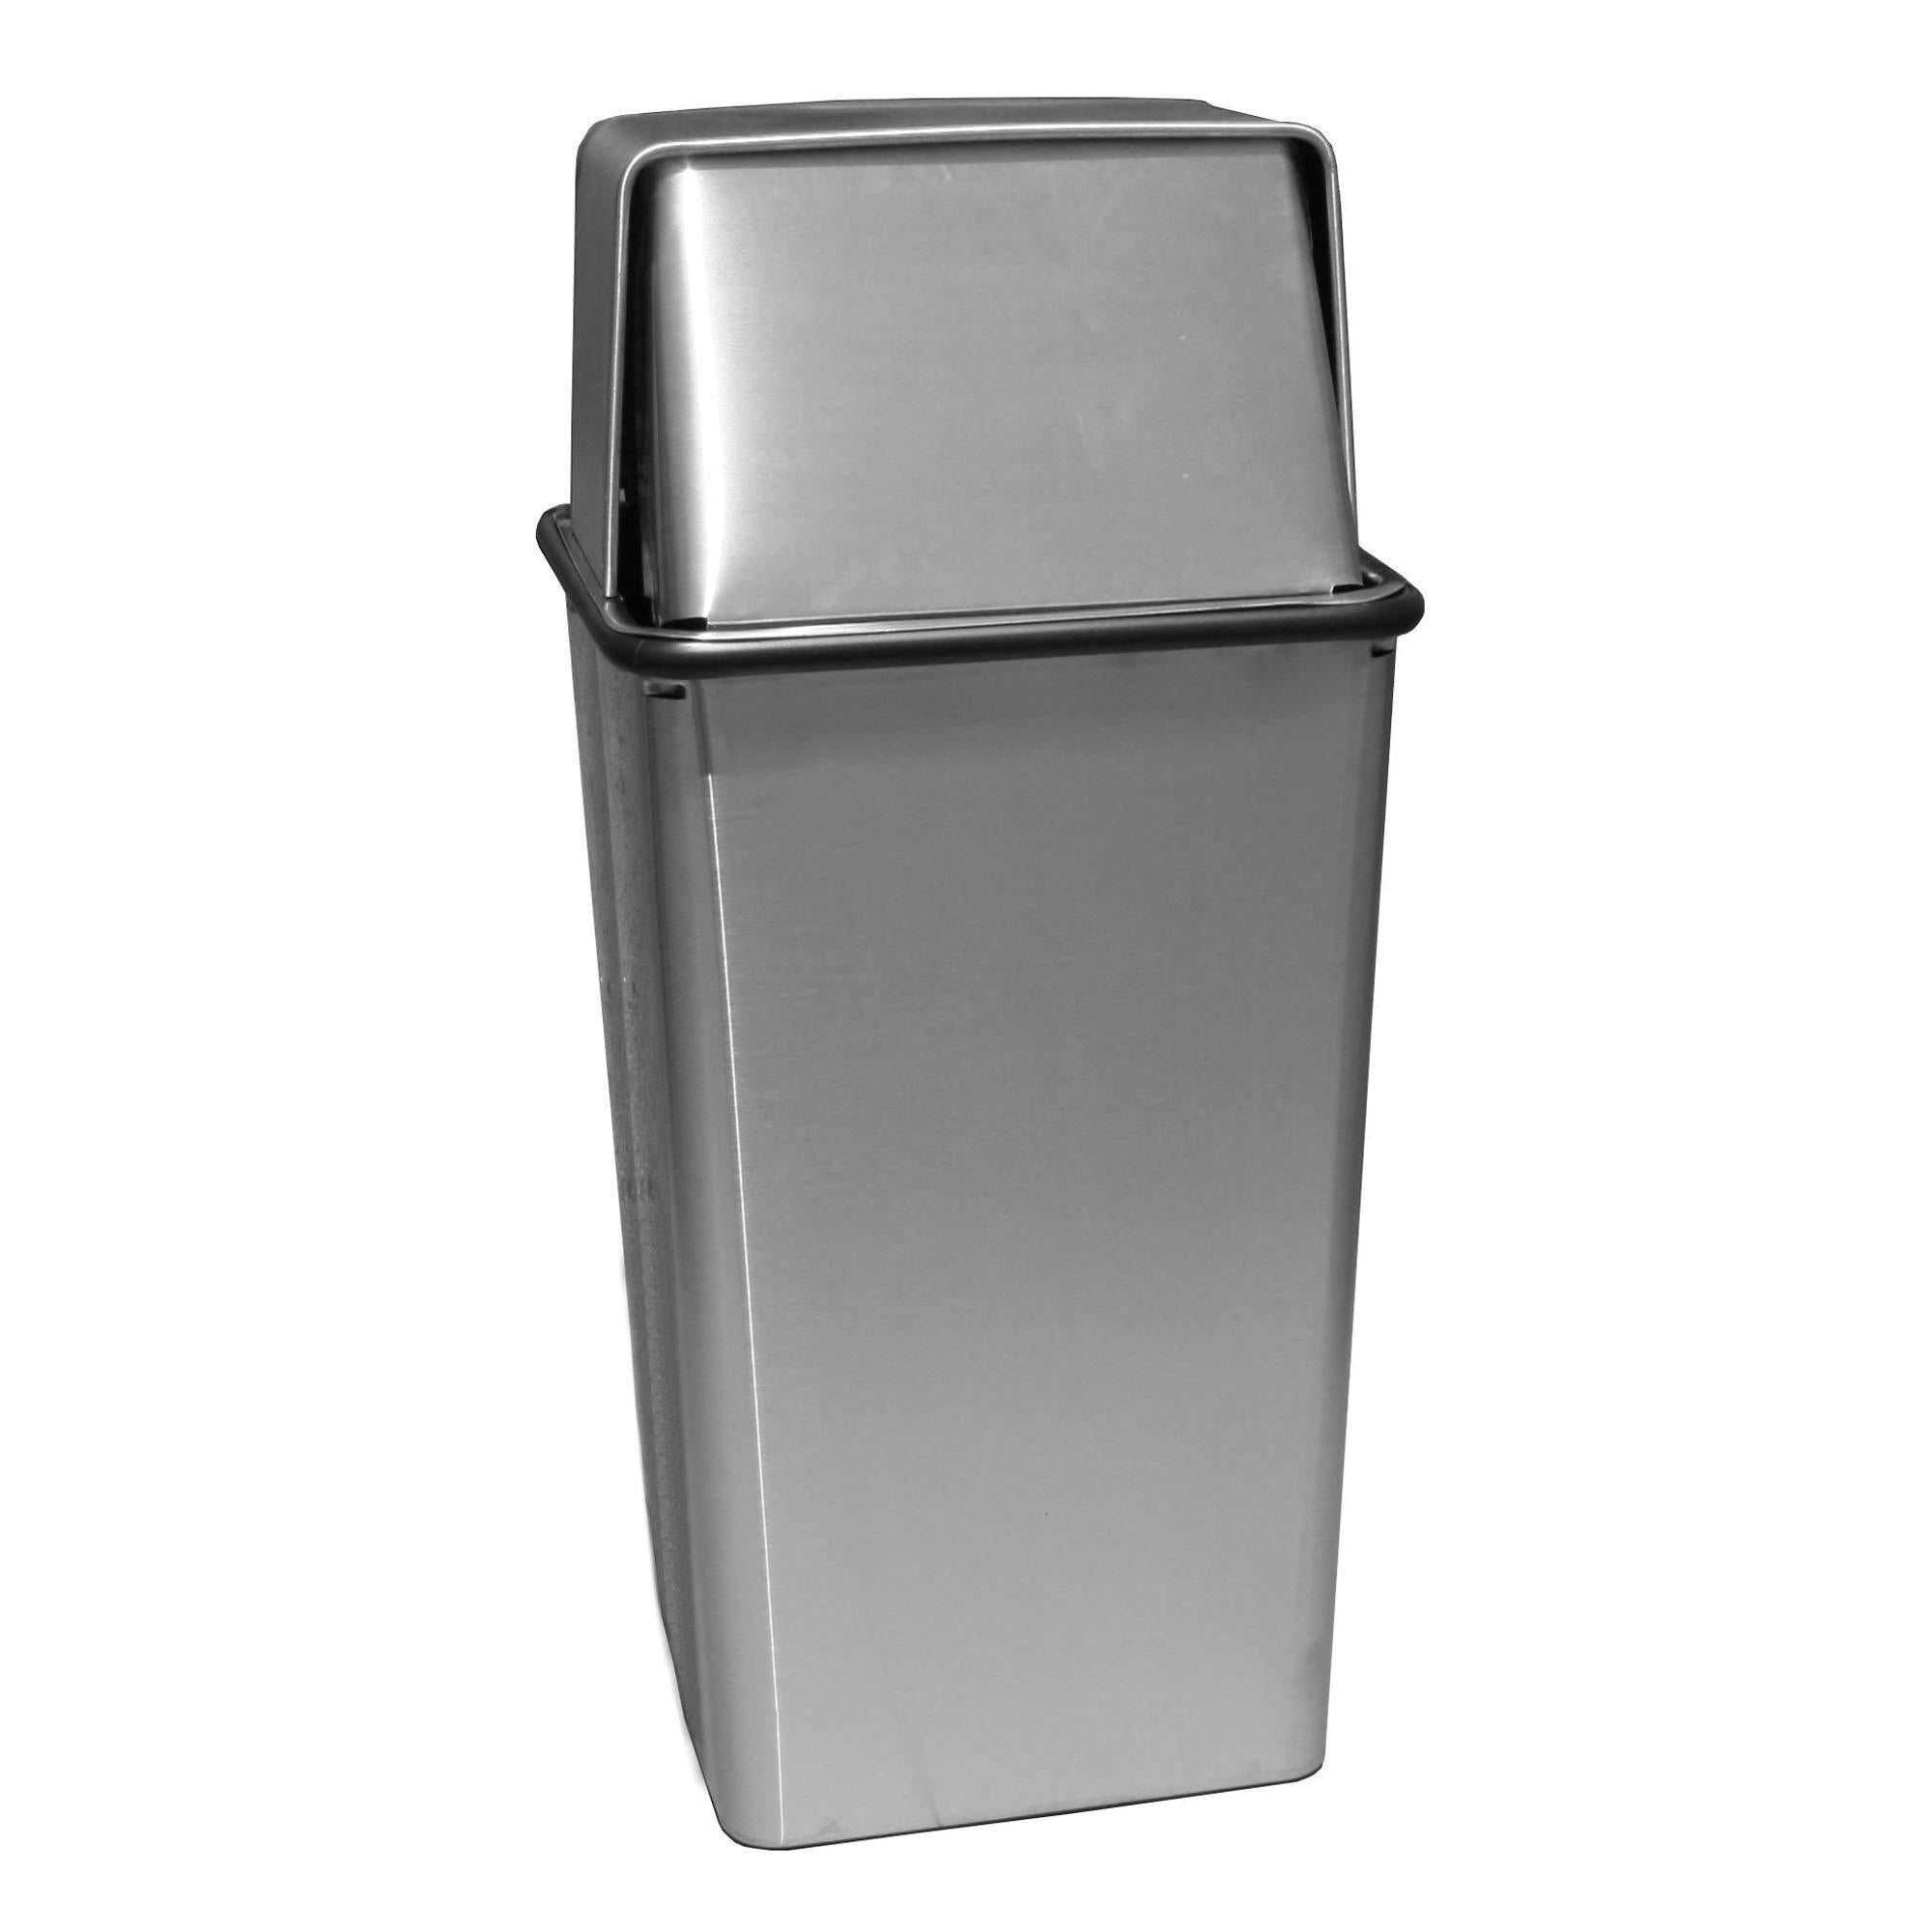 Waste Watcher Stainless Steel Push Top Waste Receptacle, 21 Gallon Capacity